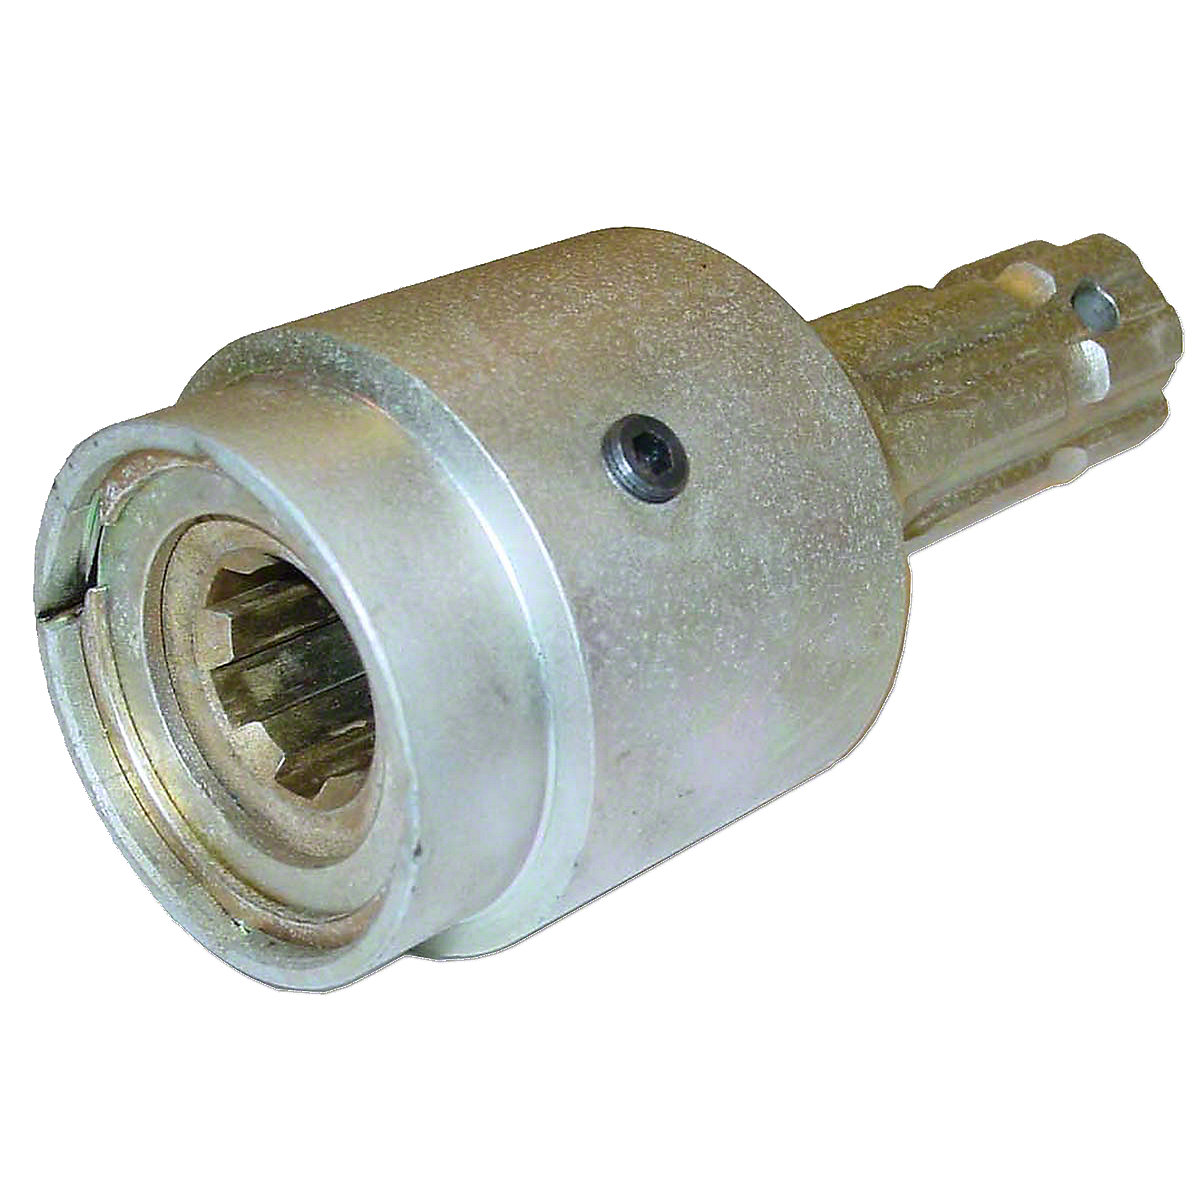 PTO Over Running Clutch 1-1/8 To 1-3/8 For Massey Harris And Massey Ferguson Tractors.